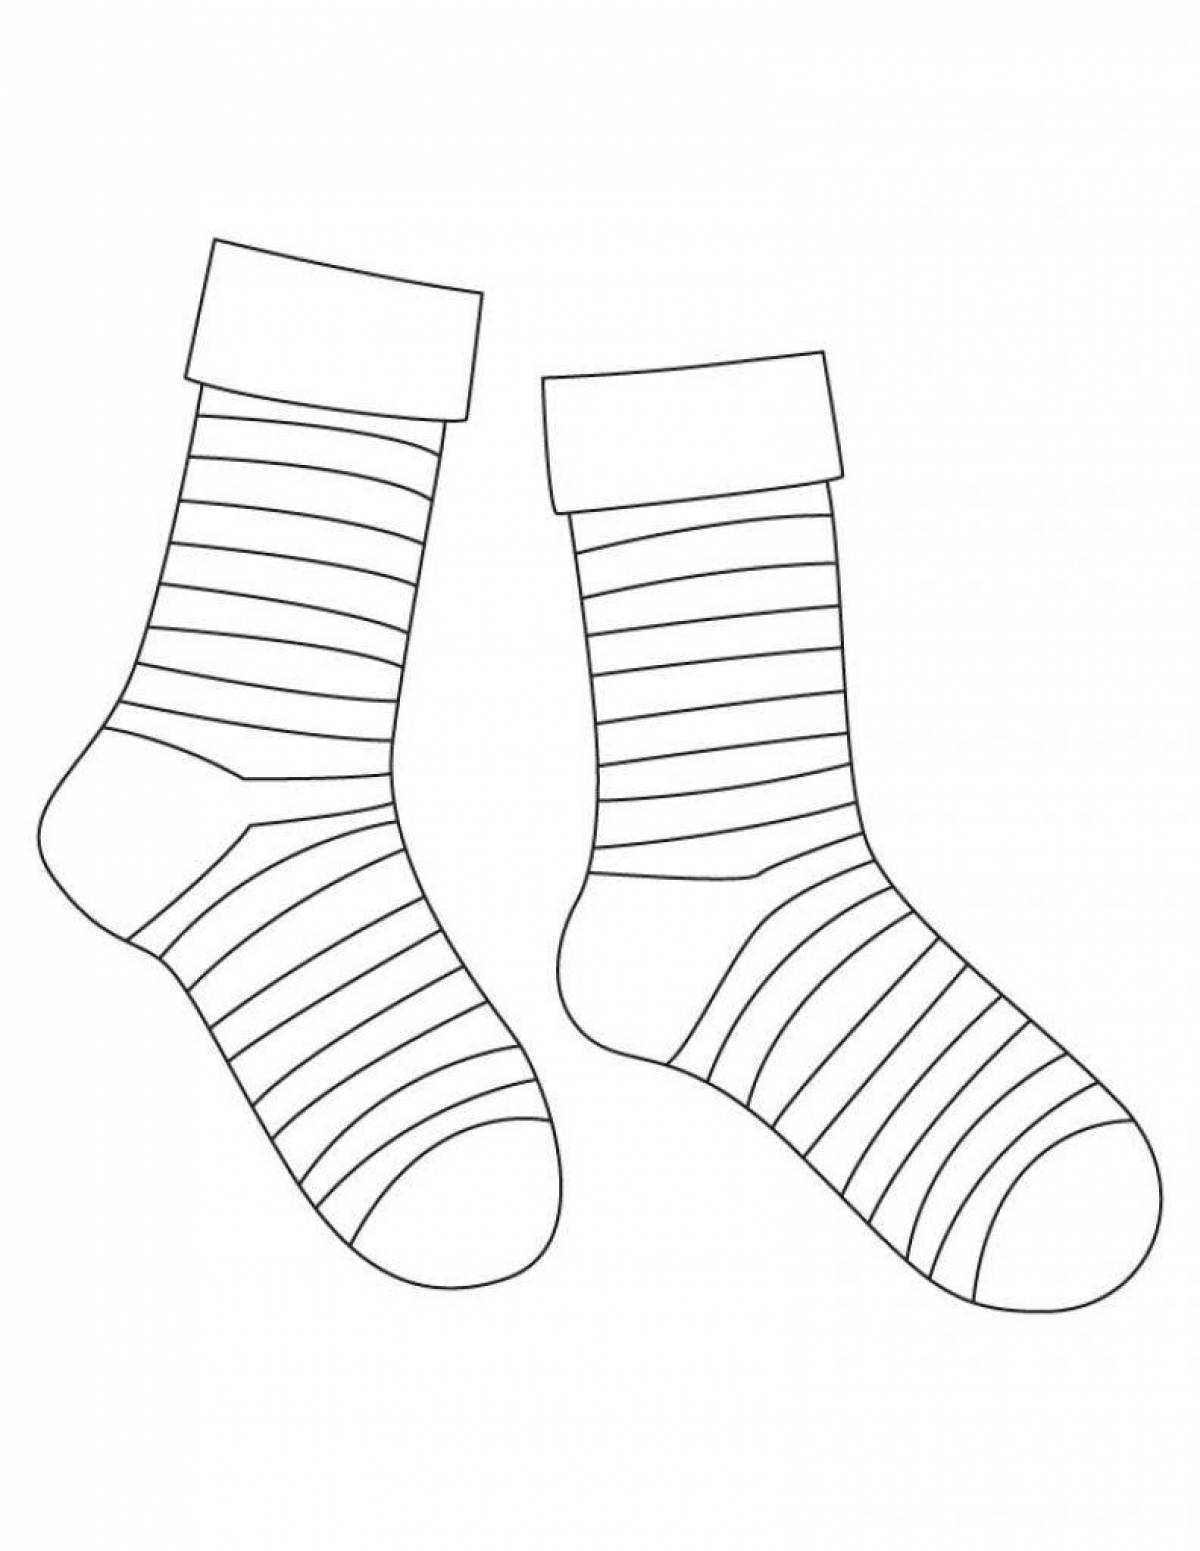 Colored socks coloring for children